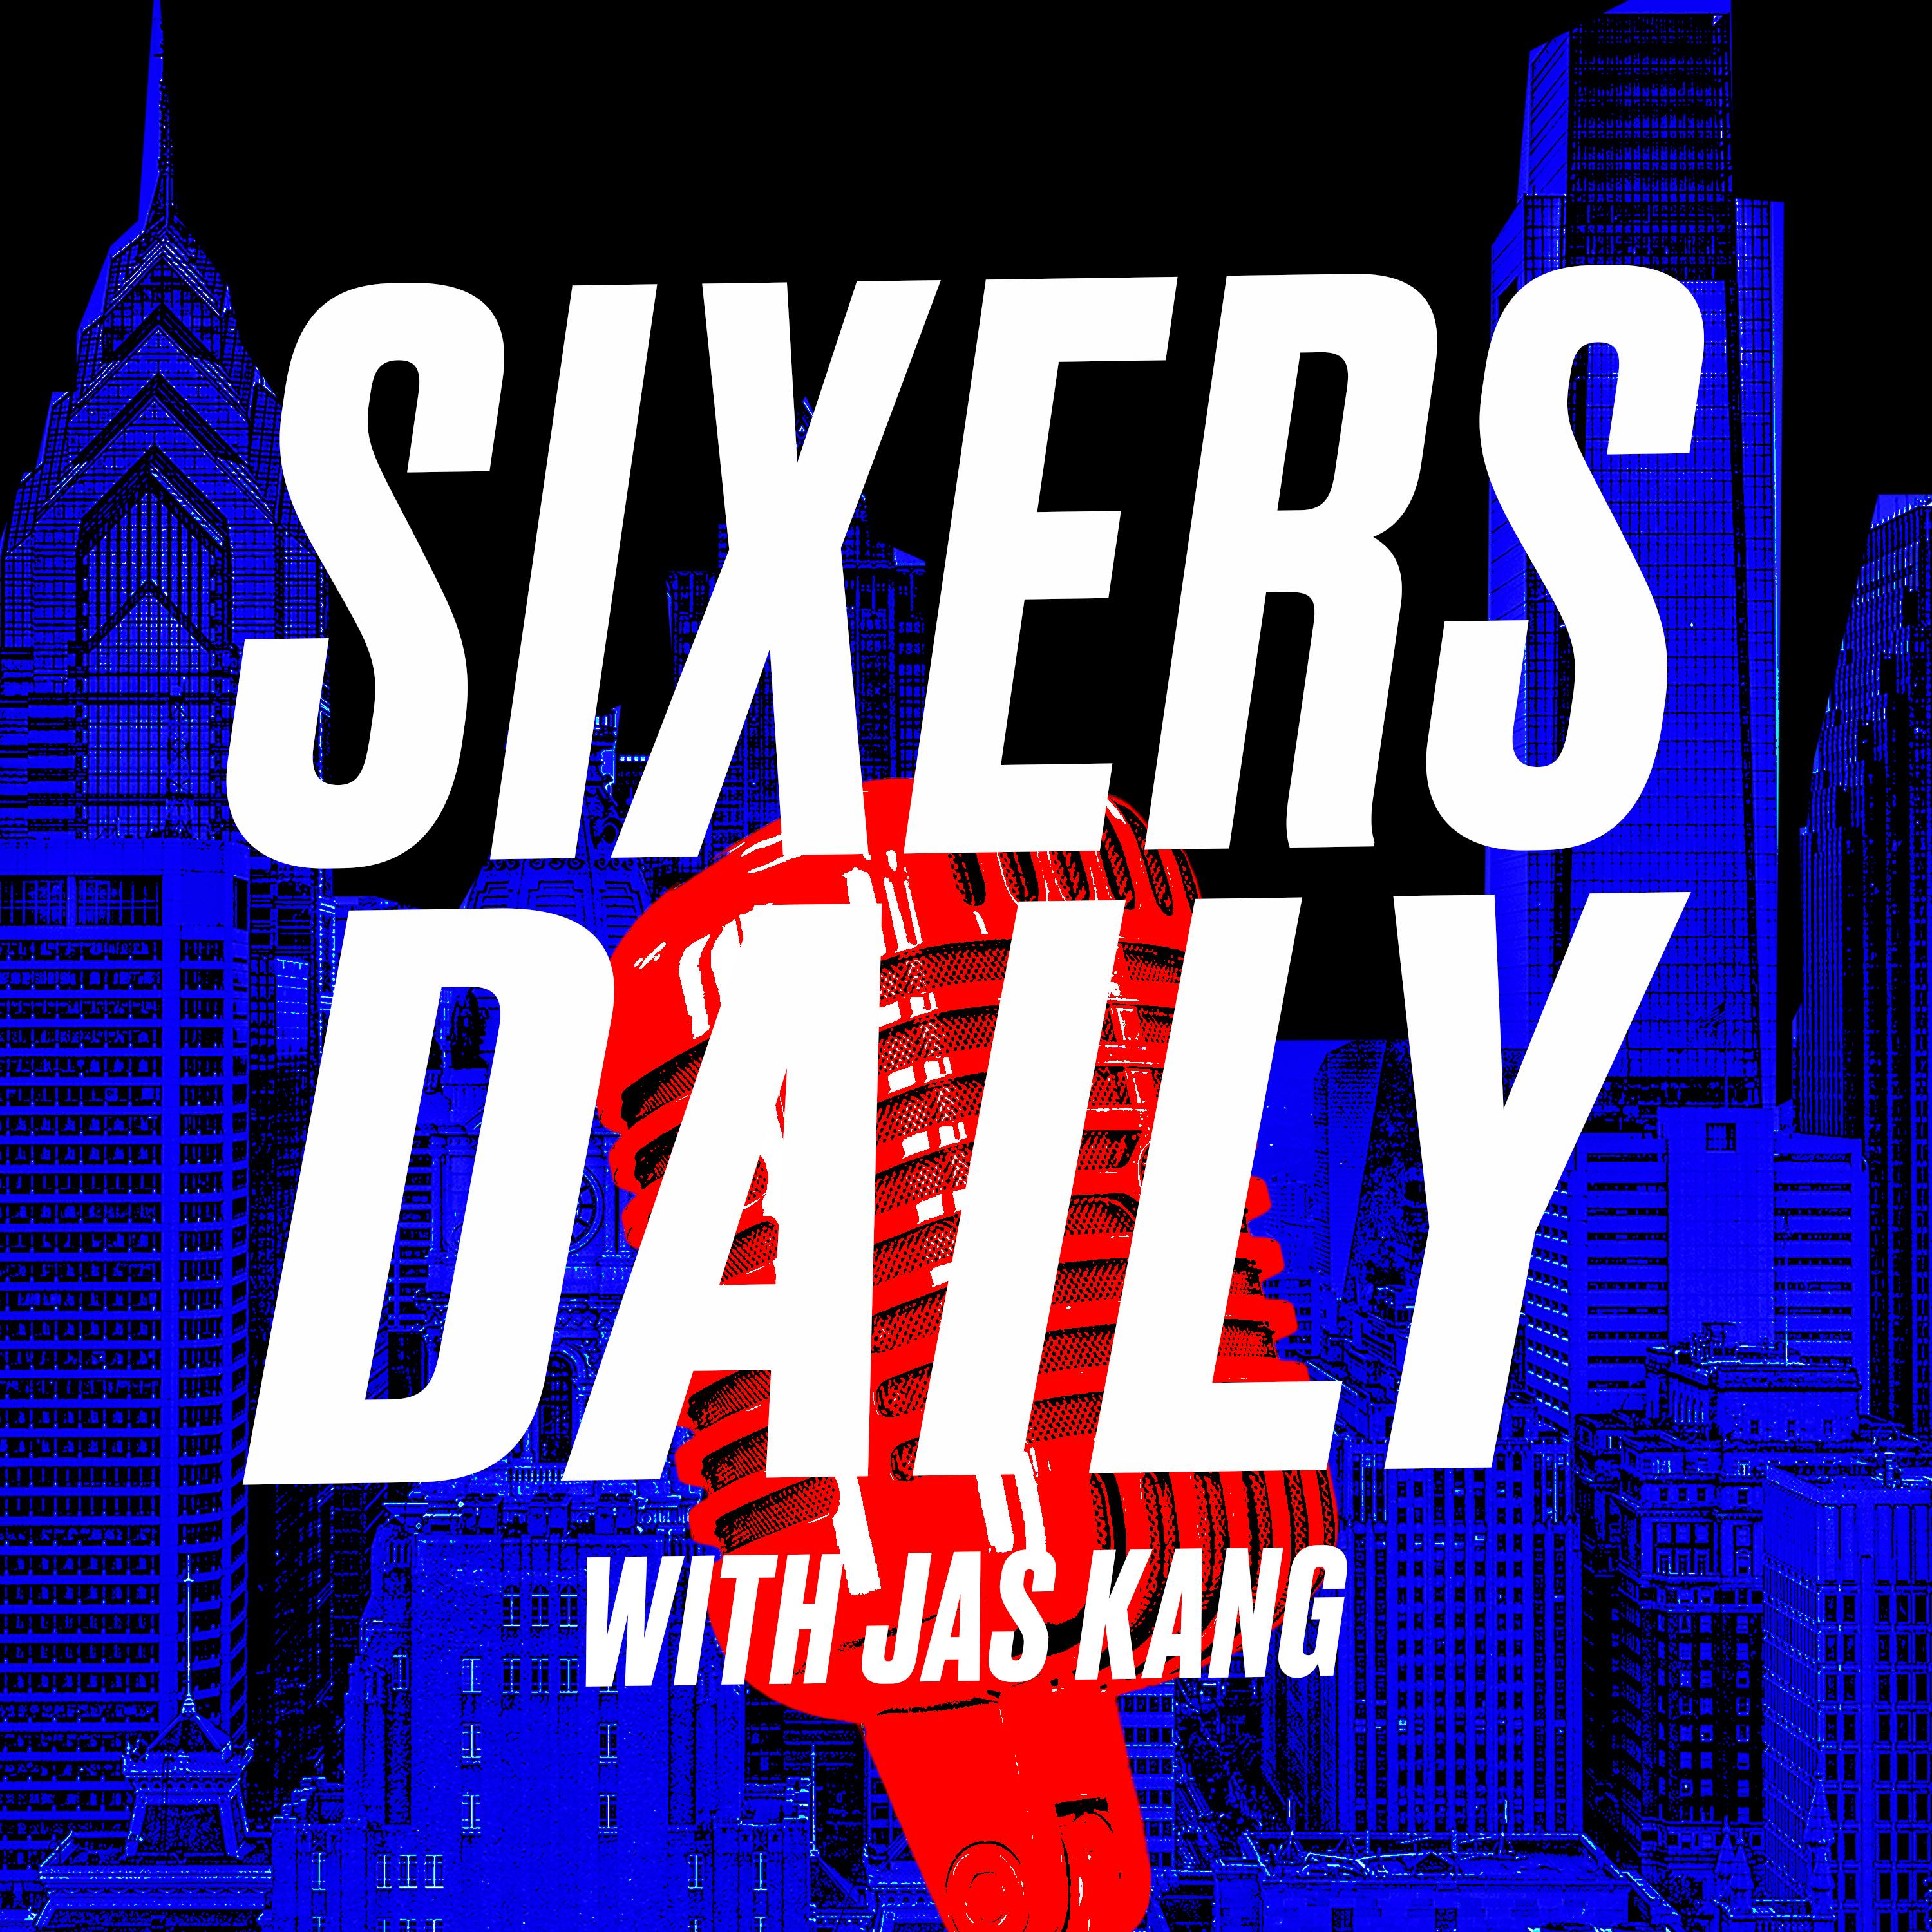 Sixers Daily with Jas Kang - The Sixers' schedule is out! When will Ben Simmons return to Philly? National TV games and an entire breakdown. Plus, LeBron James re-signs with the Lakers and Kevin Duran